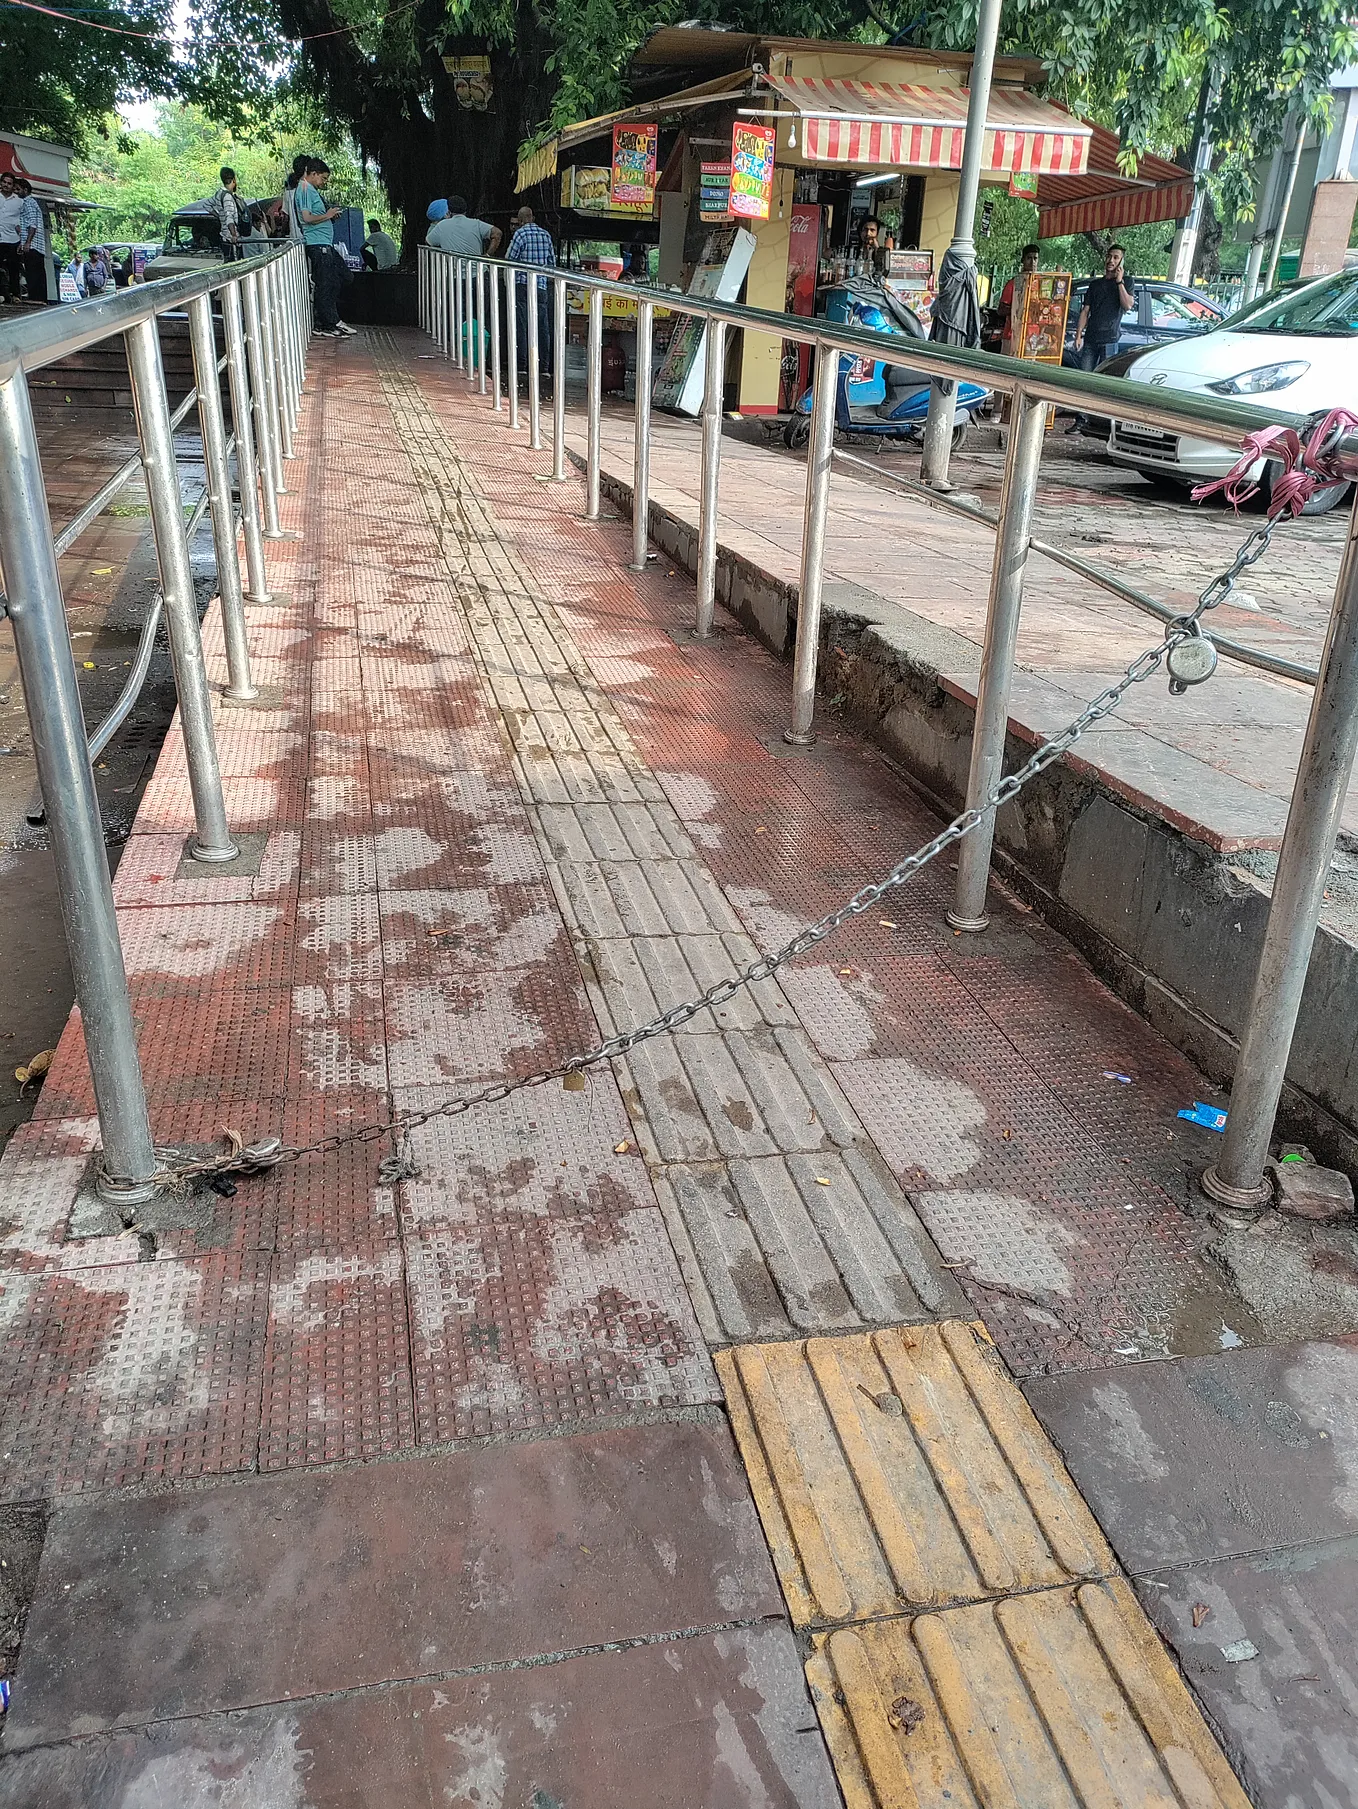 Image of ramp whose entry has been locked with chains in new friends colony community centre market